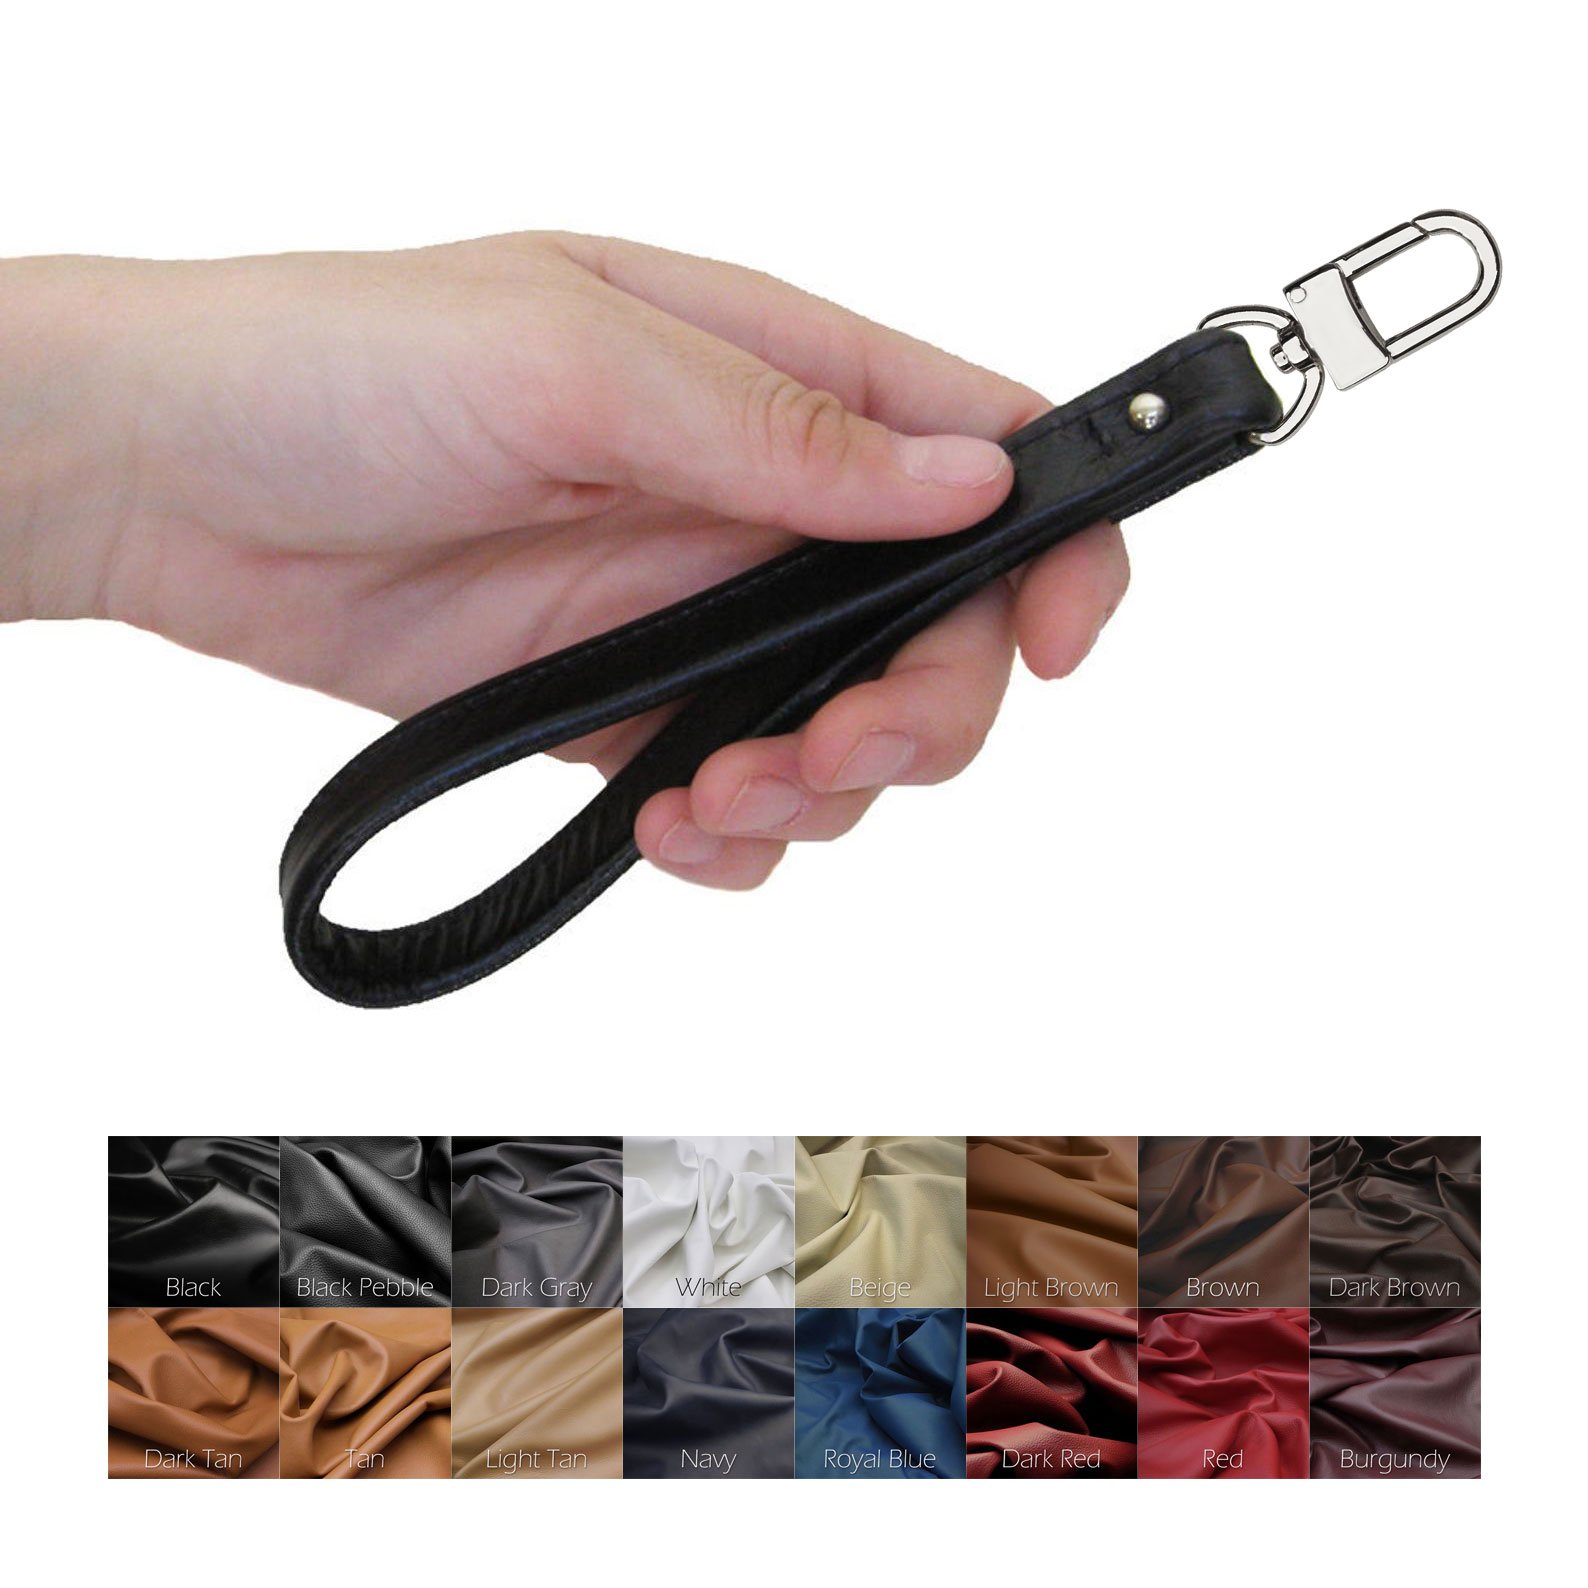 Black Leather Strap with Leather Woven Through - 3/4 inch (19mm) Wide,  U-shape #16LG Clips